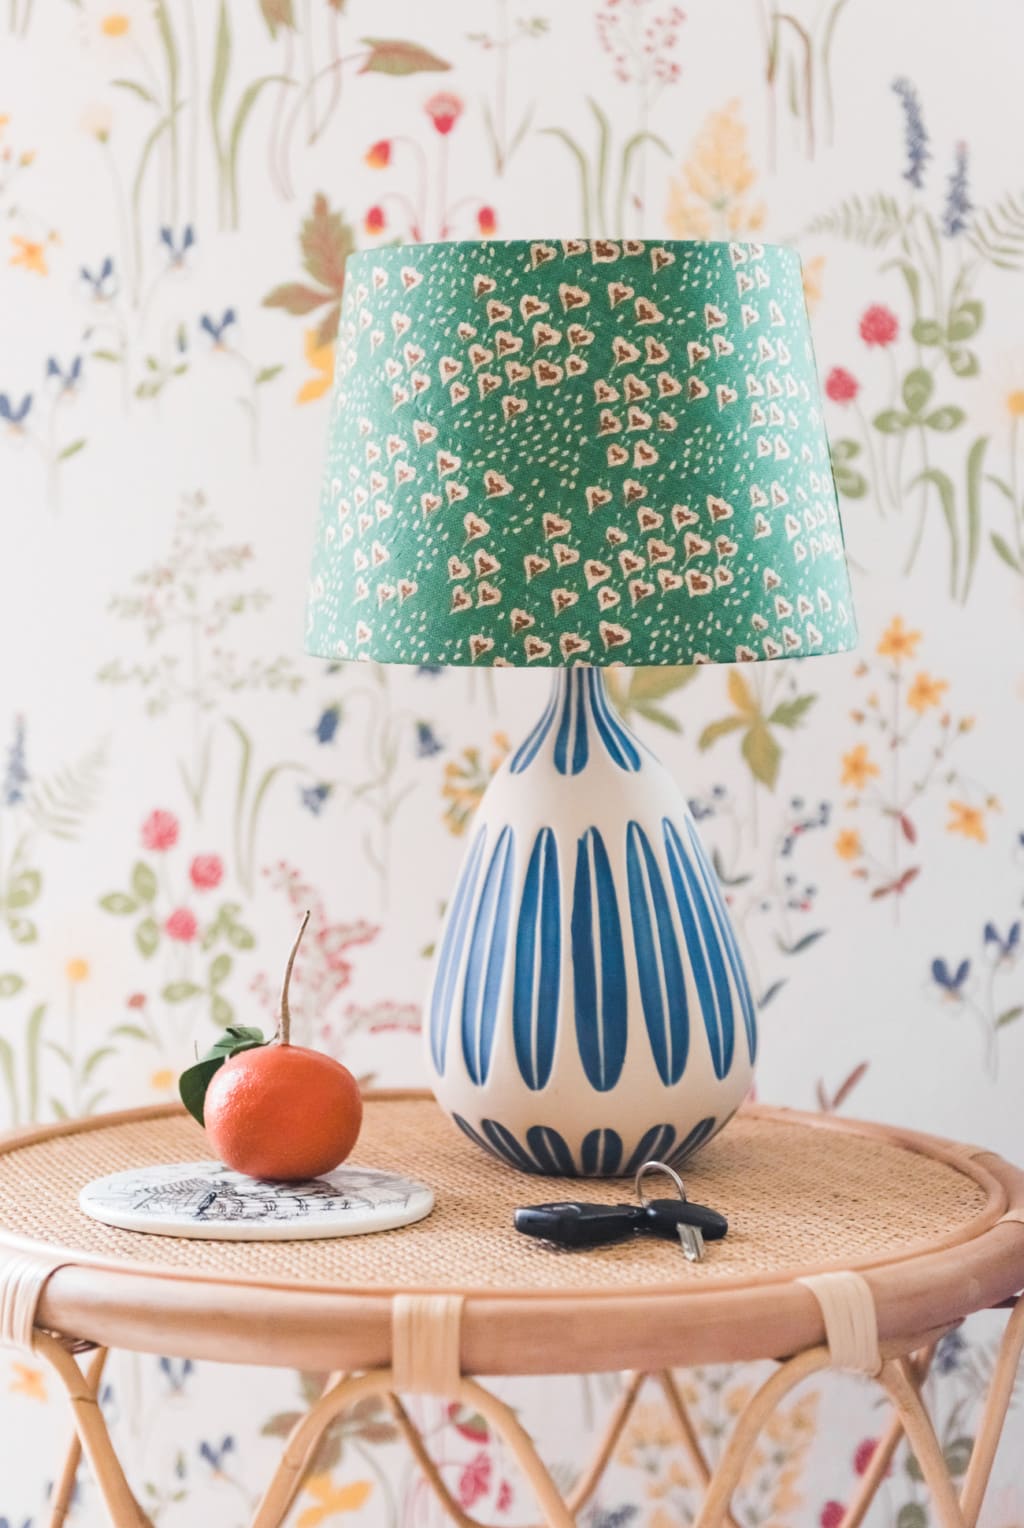 3 Diy Lampshades Made With Unexpected, How To Make A Material Lampshade